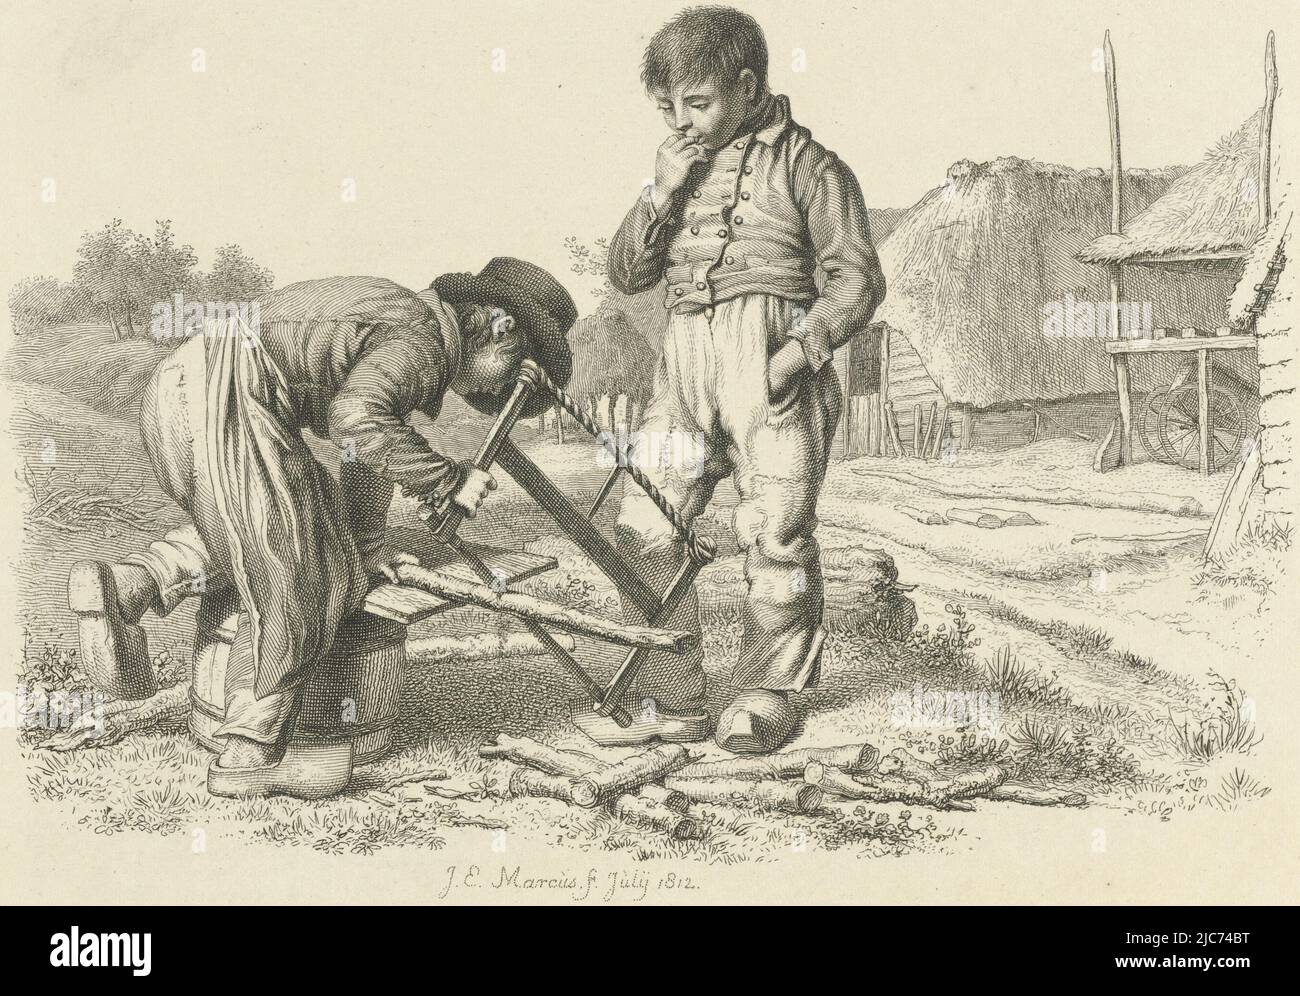 A boy cutting a branch. Next to him is a second boy with a finger in his mouth. In the background a farm, Sawing and a standing boy Study printwork, Etudes grav, print maker: Jacob Ernst Marcus, (mentioned on object), Amsterdam, Jul-1812, paper, etching, h 188 mm × w 237 mm Stock Photo